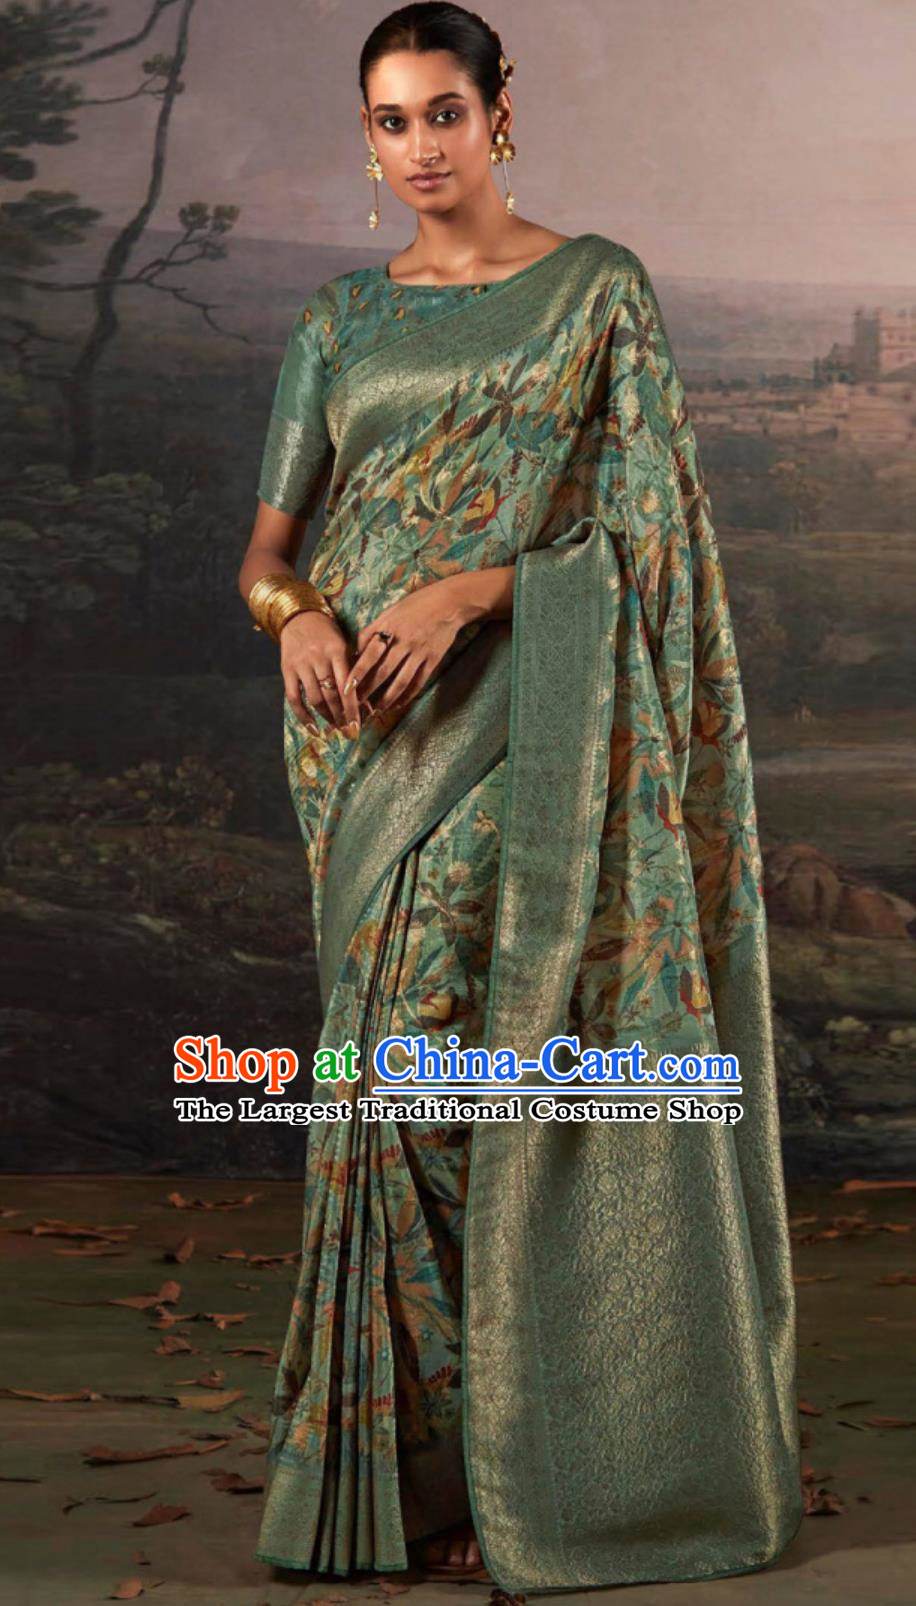 India Olive Green Sari Dress National Women Clothing Indian Traditional Costume